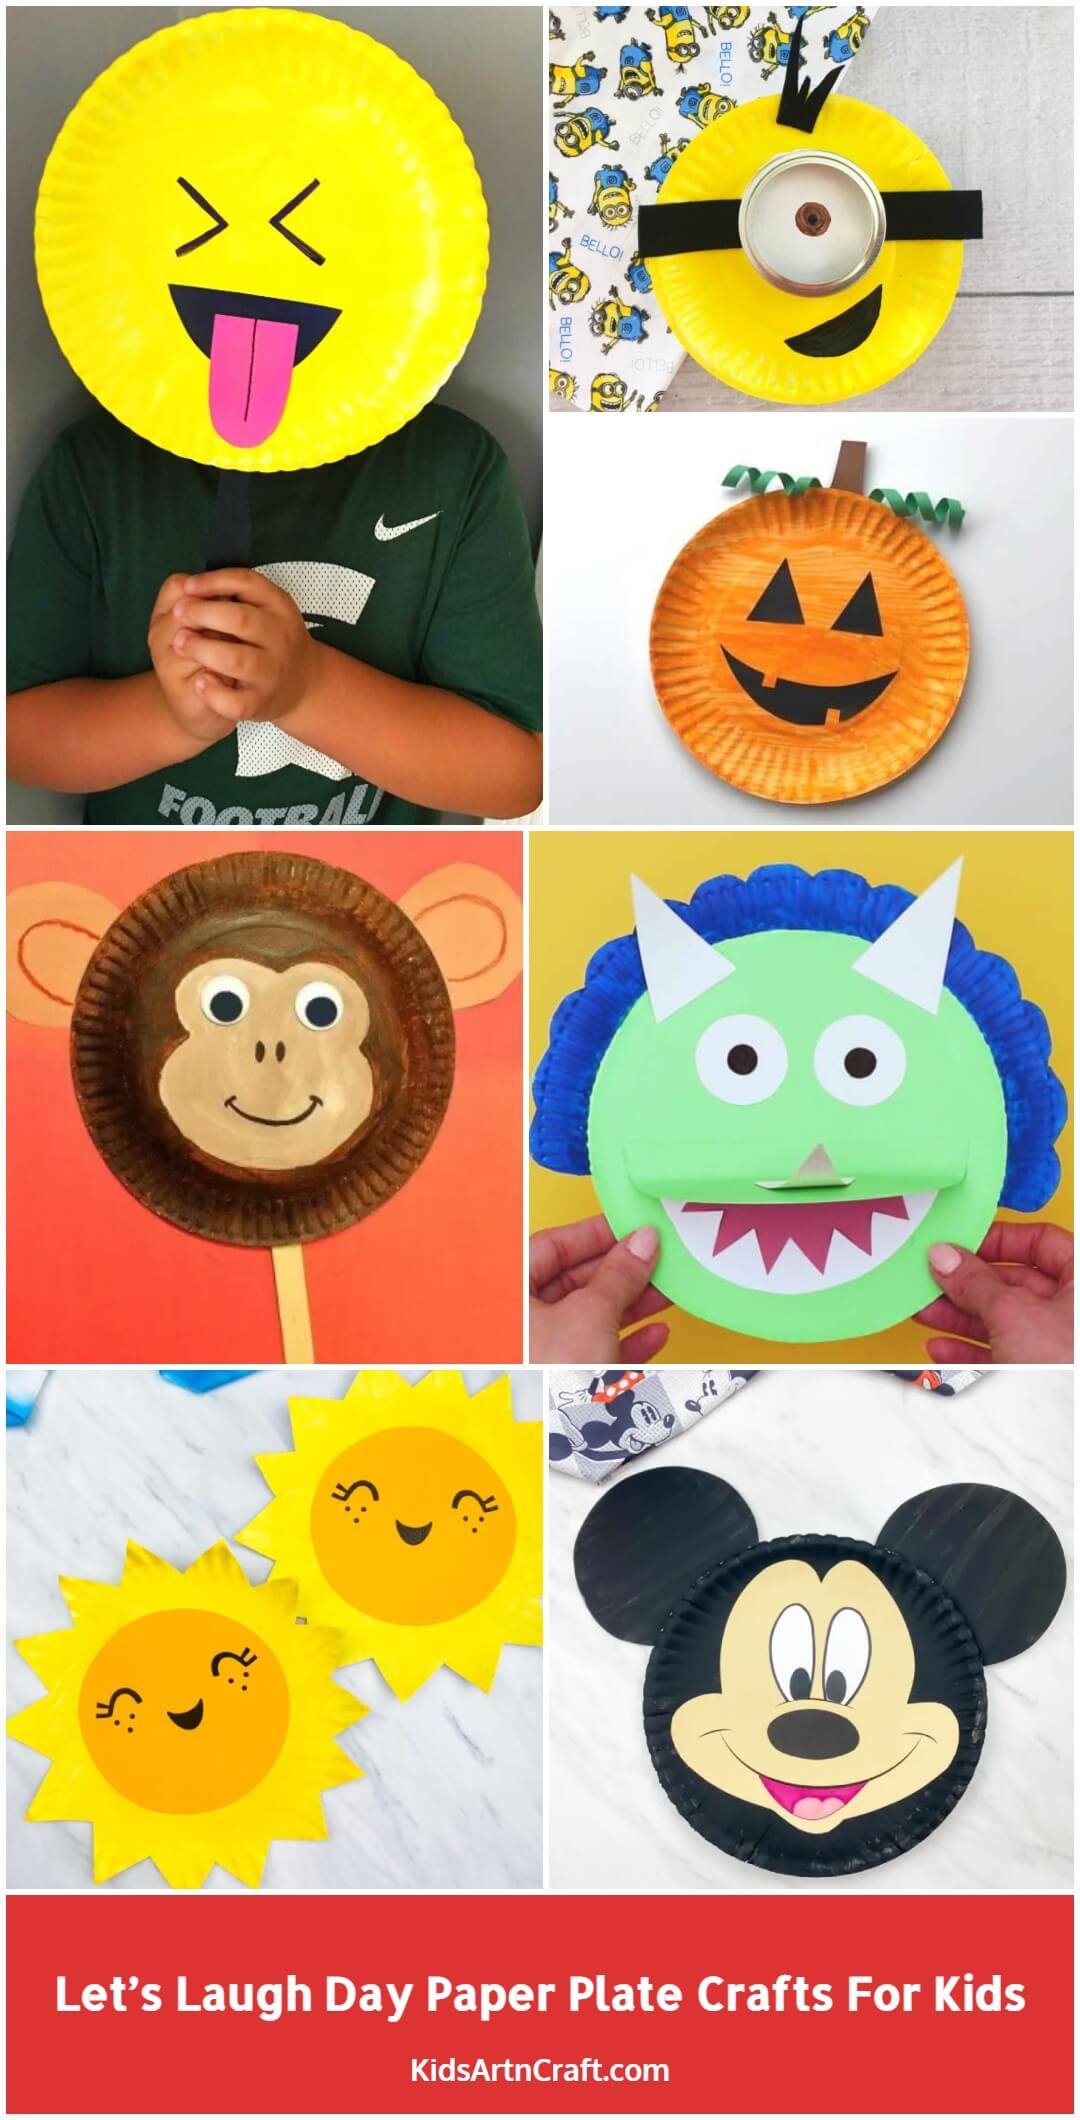 Let’s Laugh Day Paper Plate Crafts for Kids